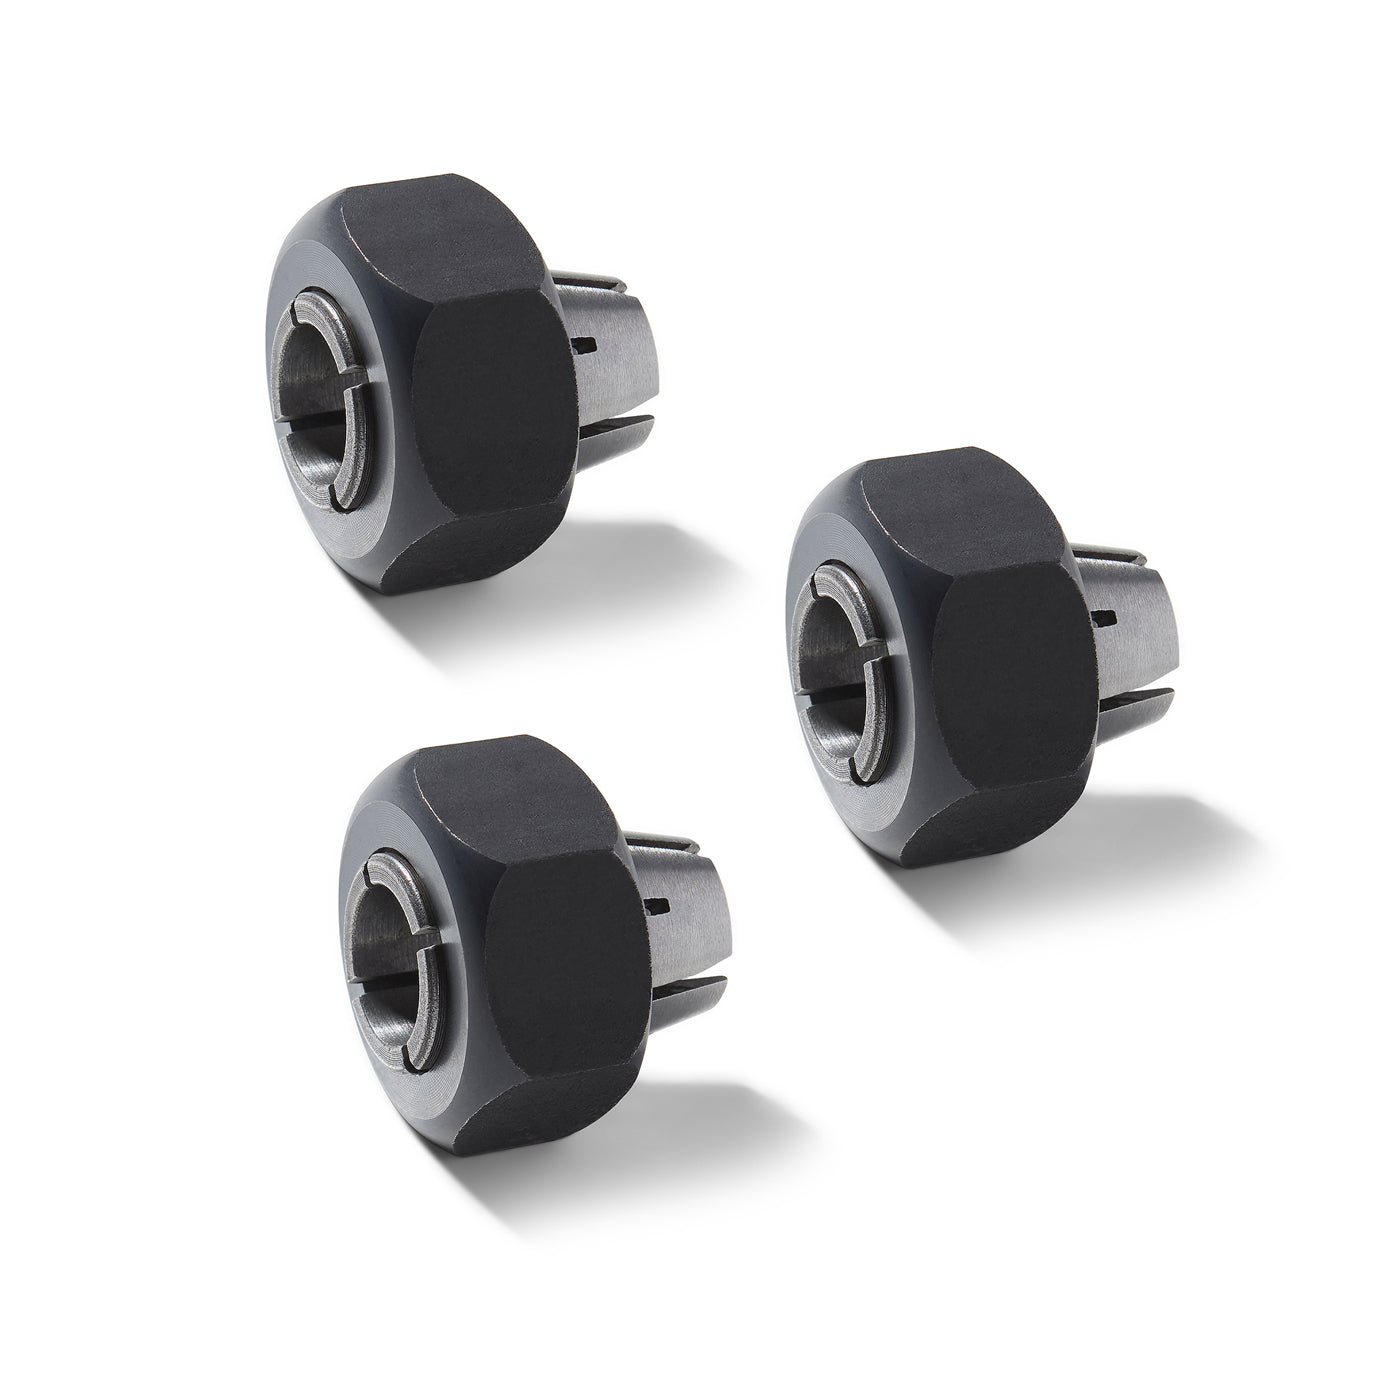 Router Motor Collets and Nuts - Set of 3 (6mm, 8mm, 12mm)